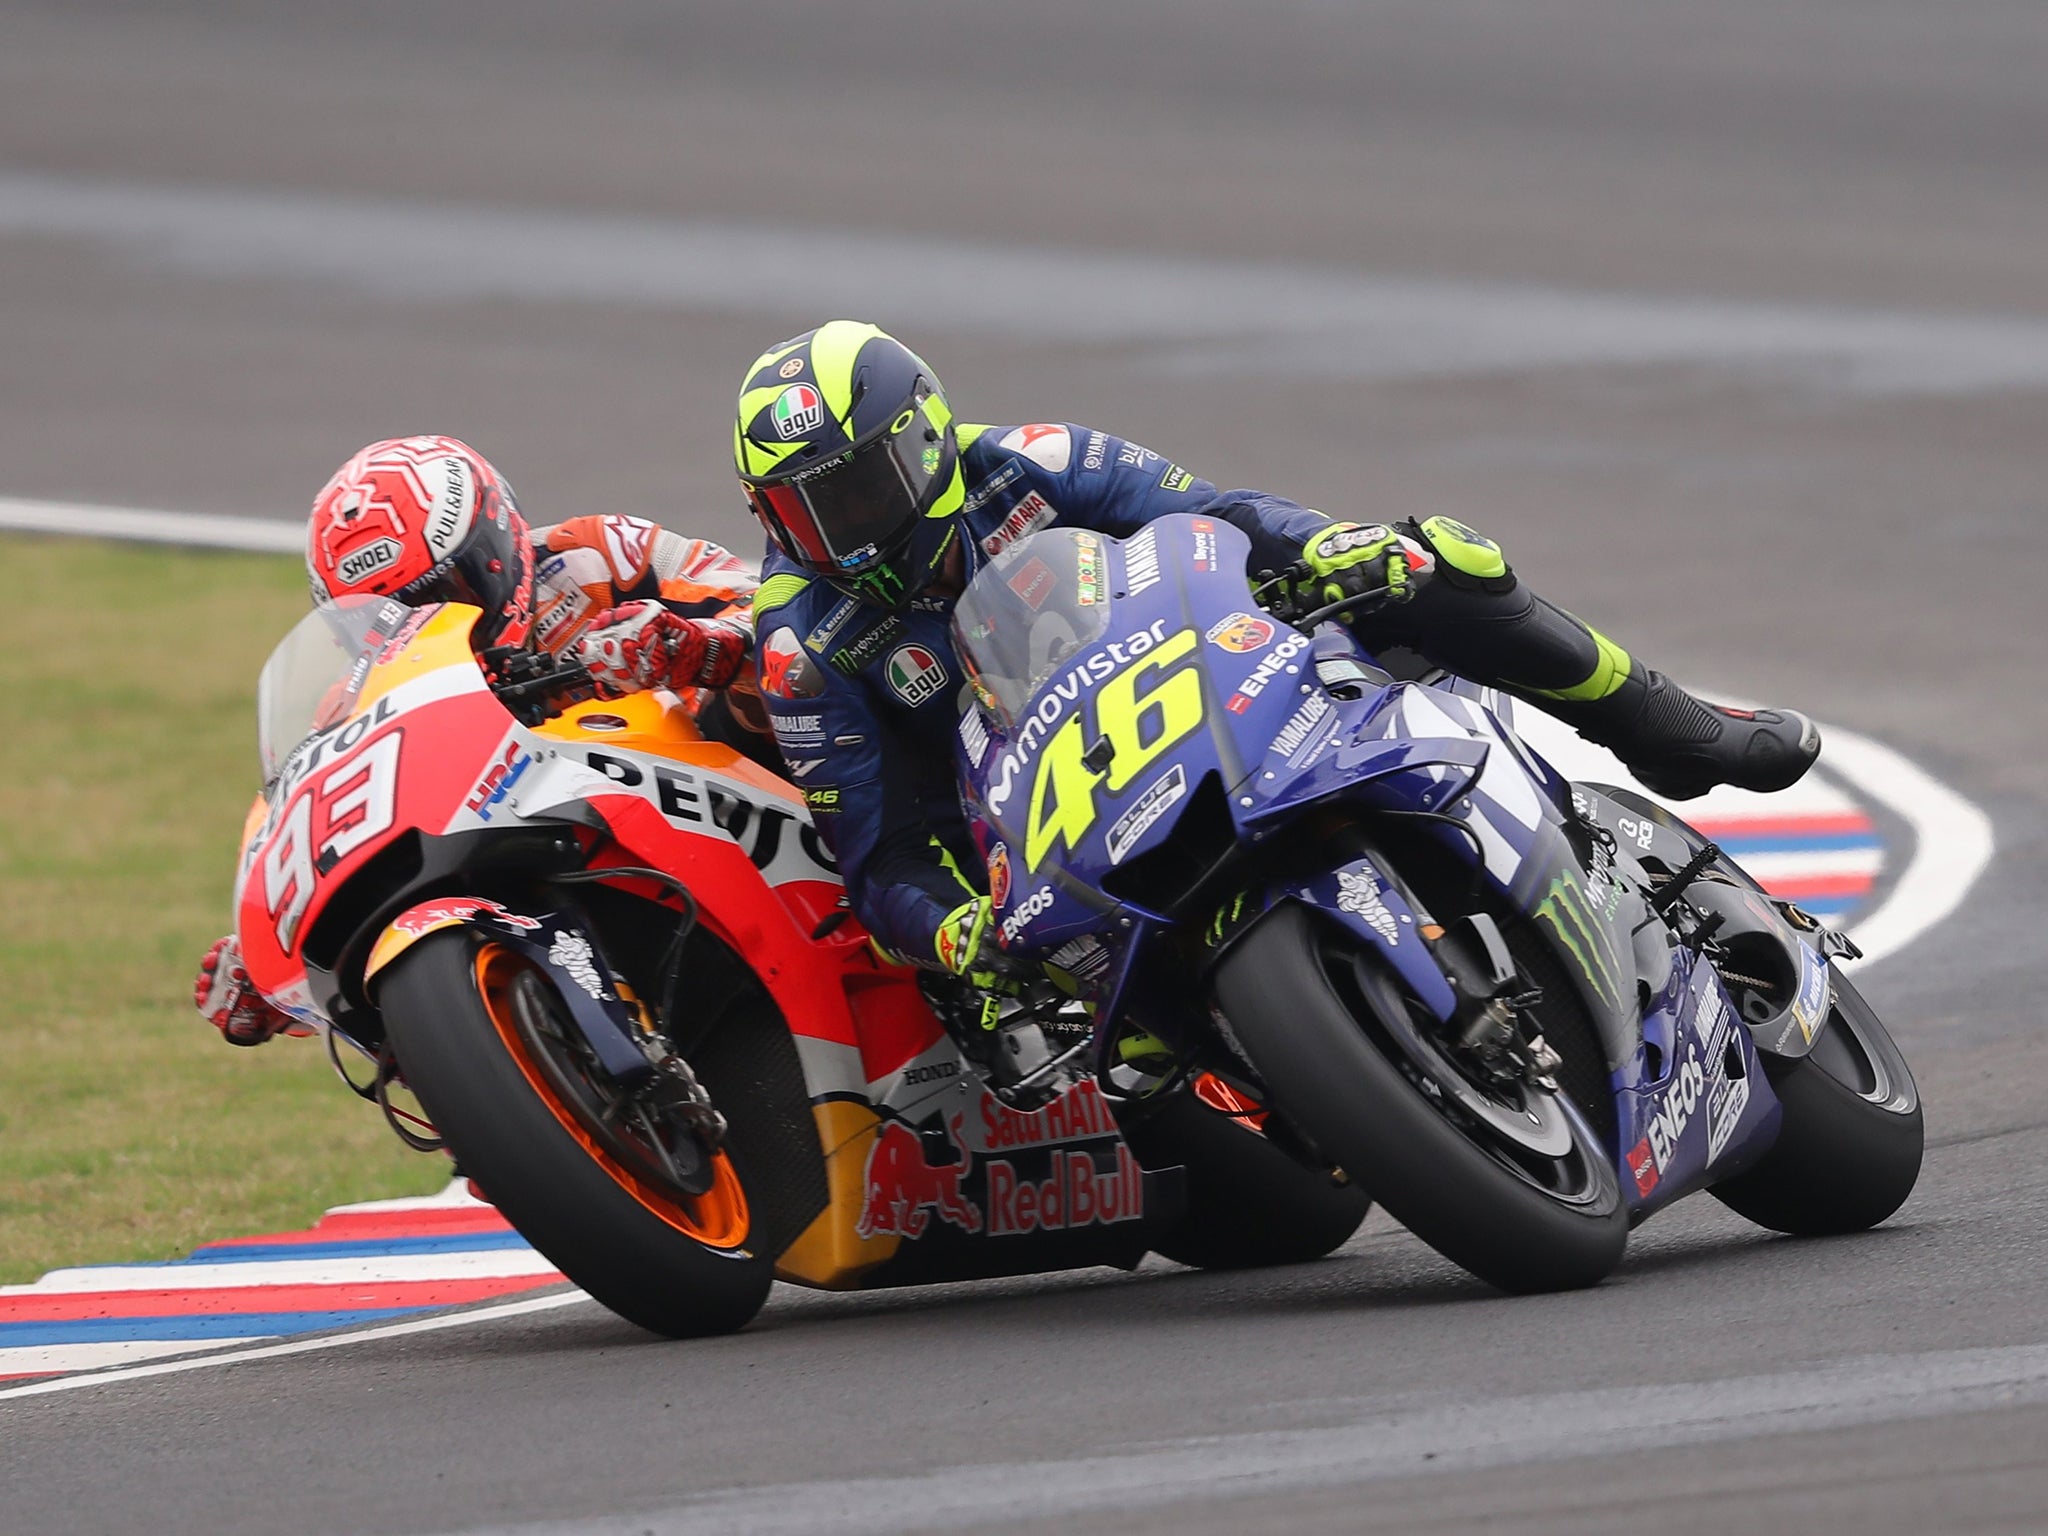 Valentino Rossi claimed Marc Marquez has 'destroyed' MotoGP and that he is 'scared' of racing against him